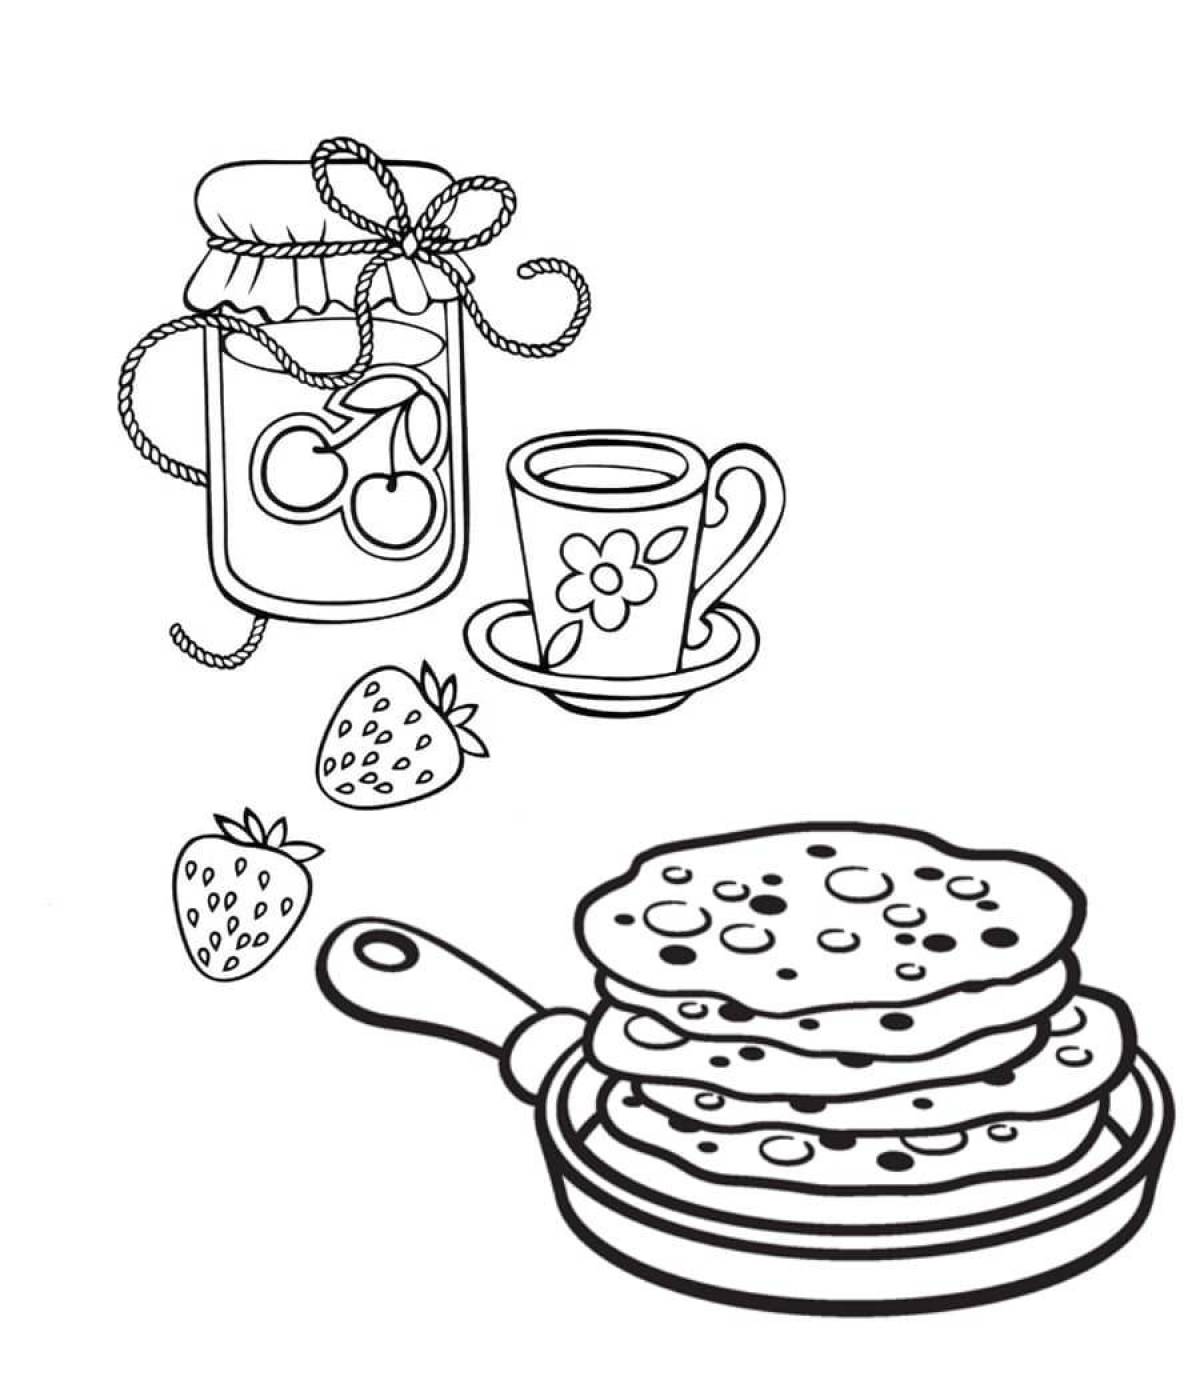 Coloring page holiday pancakes